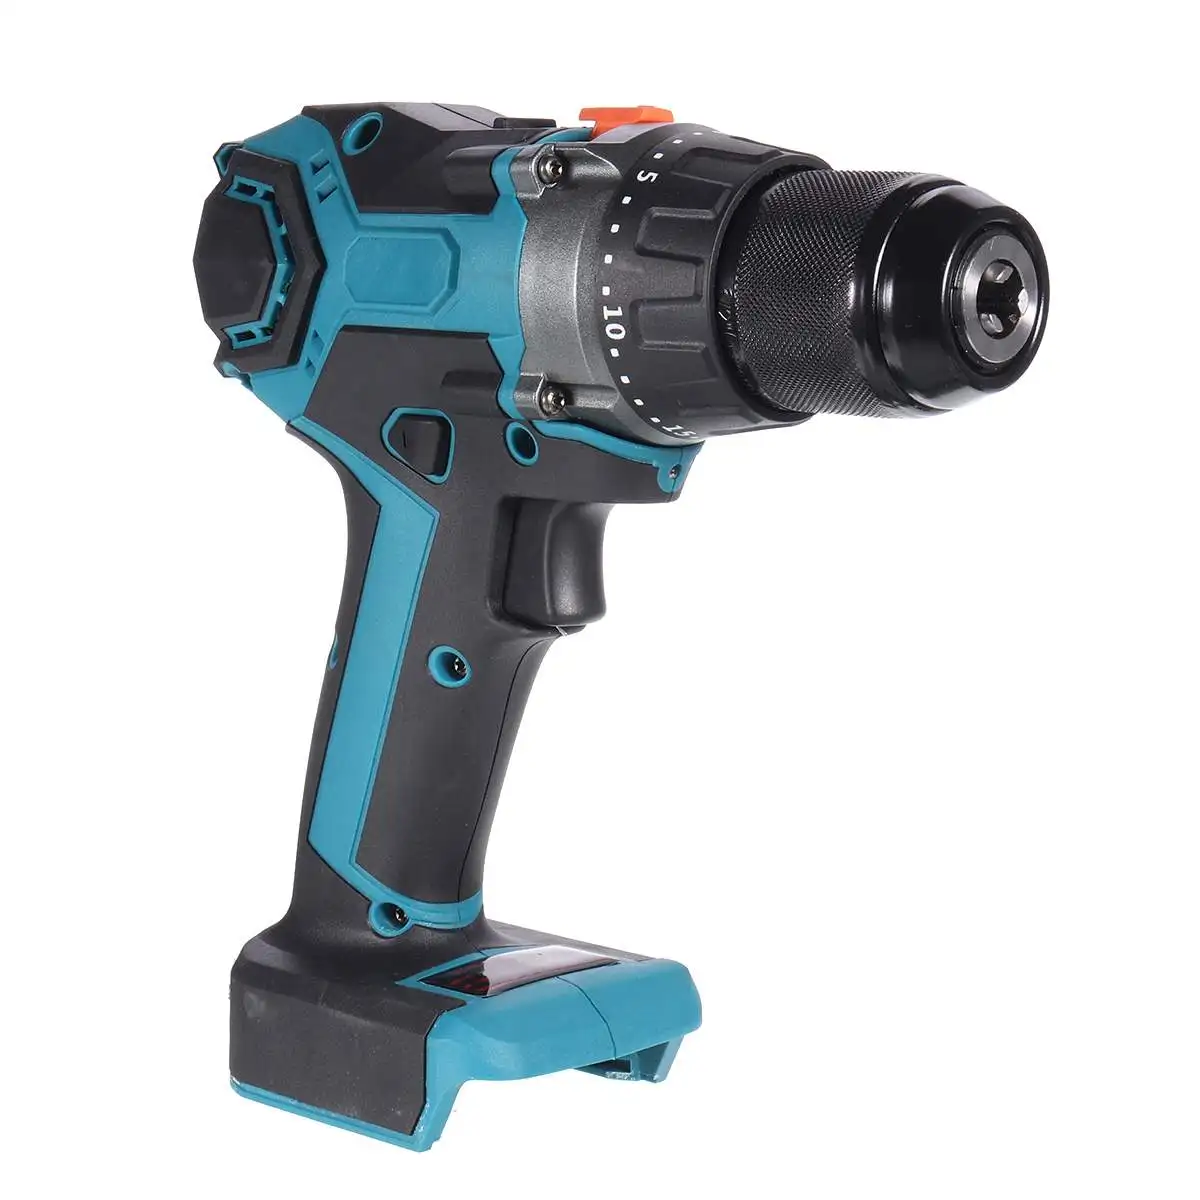 18V 450Nm 13mm Brushless Electric Drill Screwdriver with LED Light Cordless Impact Drill DIY Power Tool for Makita Battery